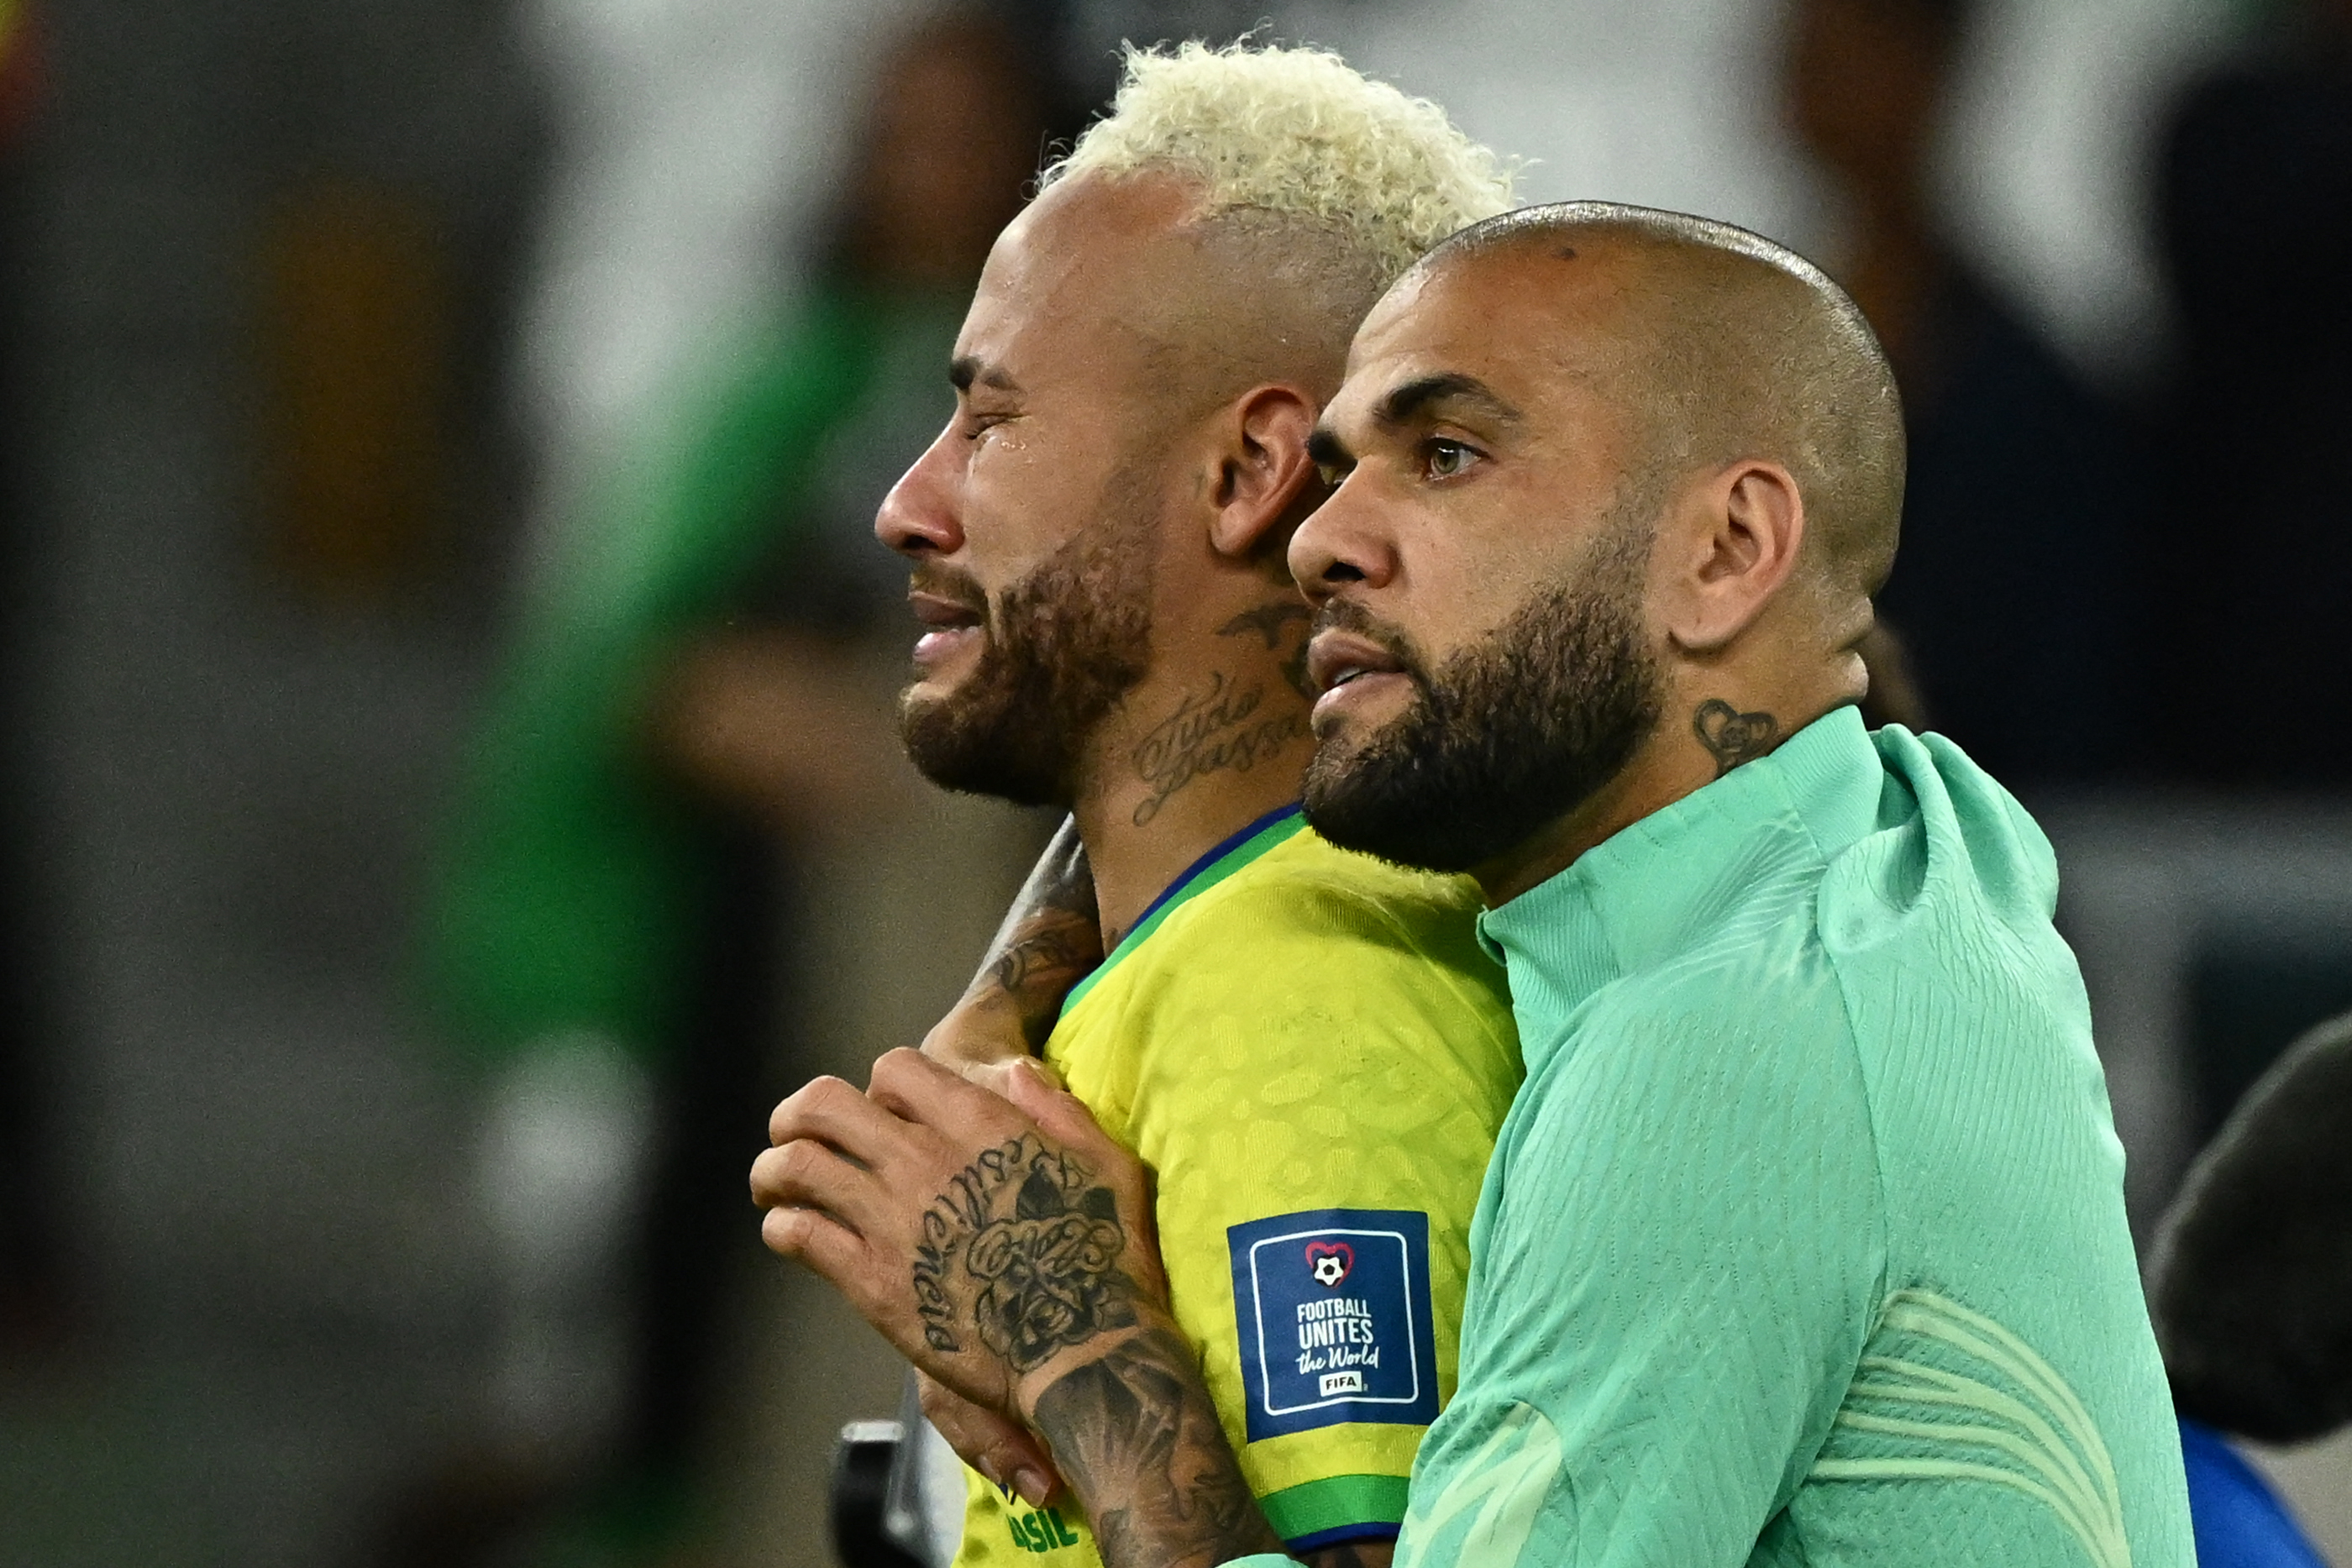 Brazil's Neymar is comforted by teammate Dani Alves as he cries after losing in the penalty shoot-out for the quarter-final match between Croatia and Brazil at Education City Stadium in Al-Rayyan, Qatar on December 9.